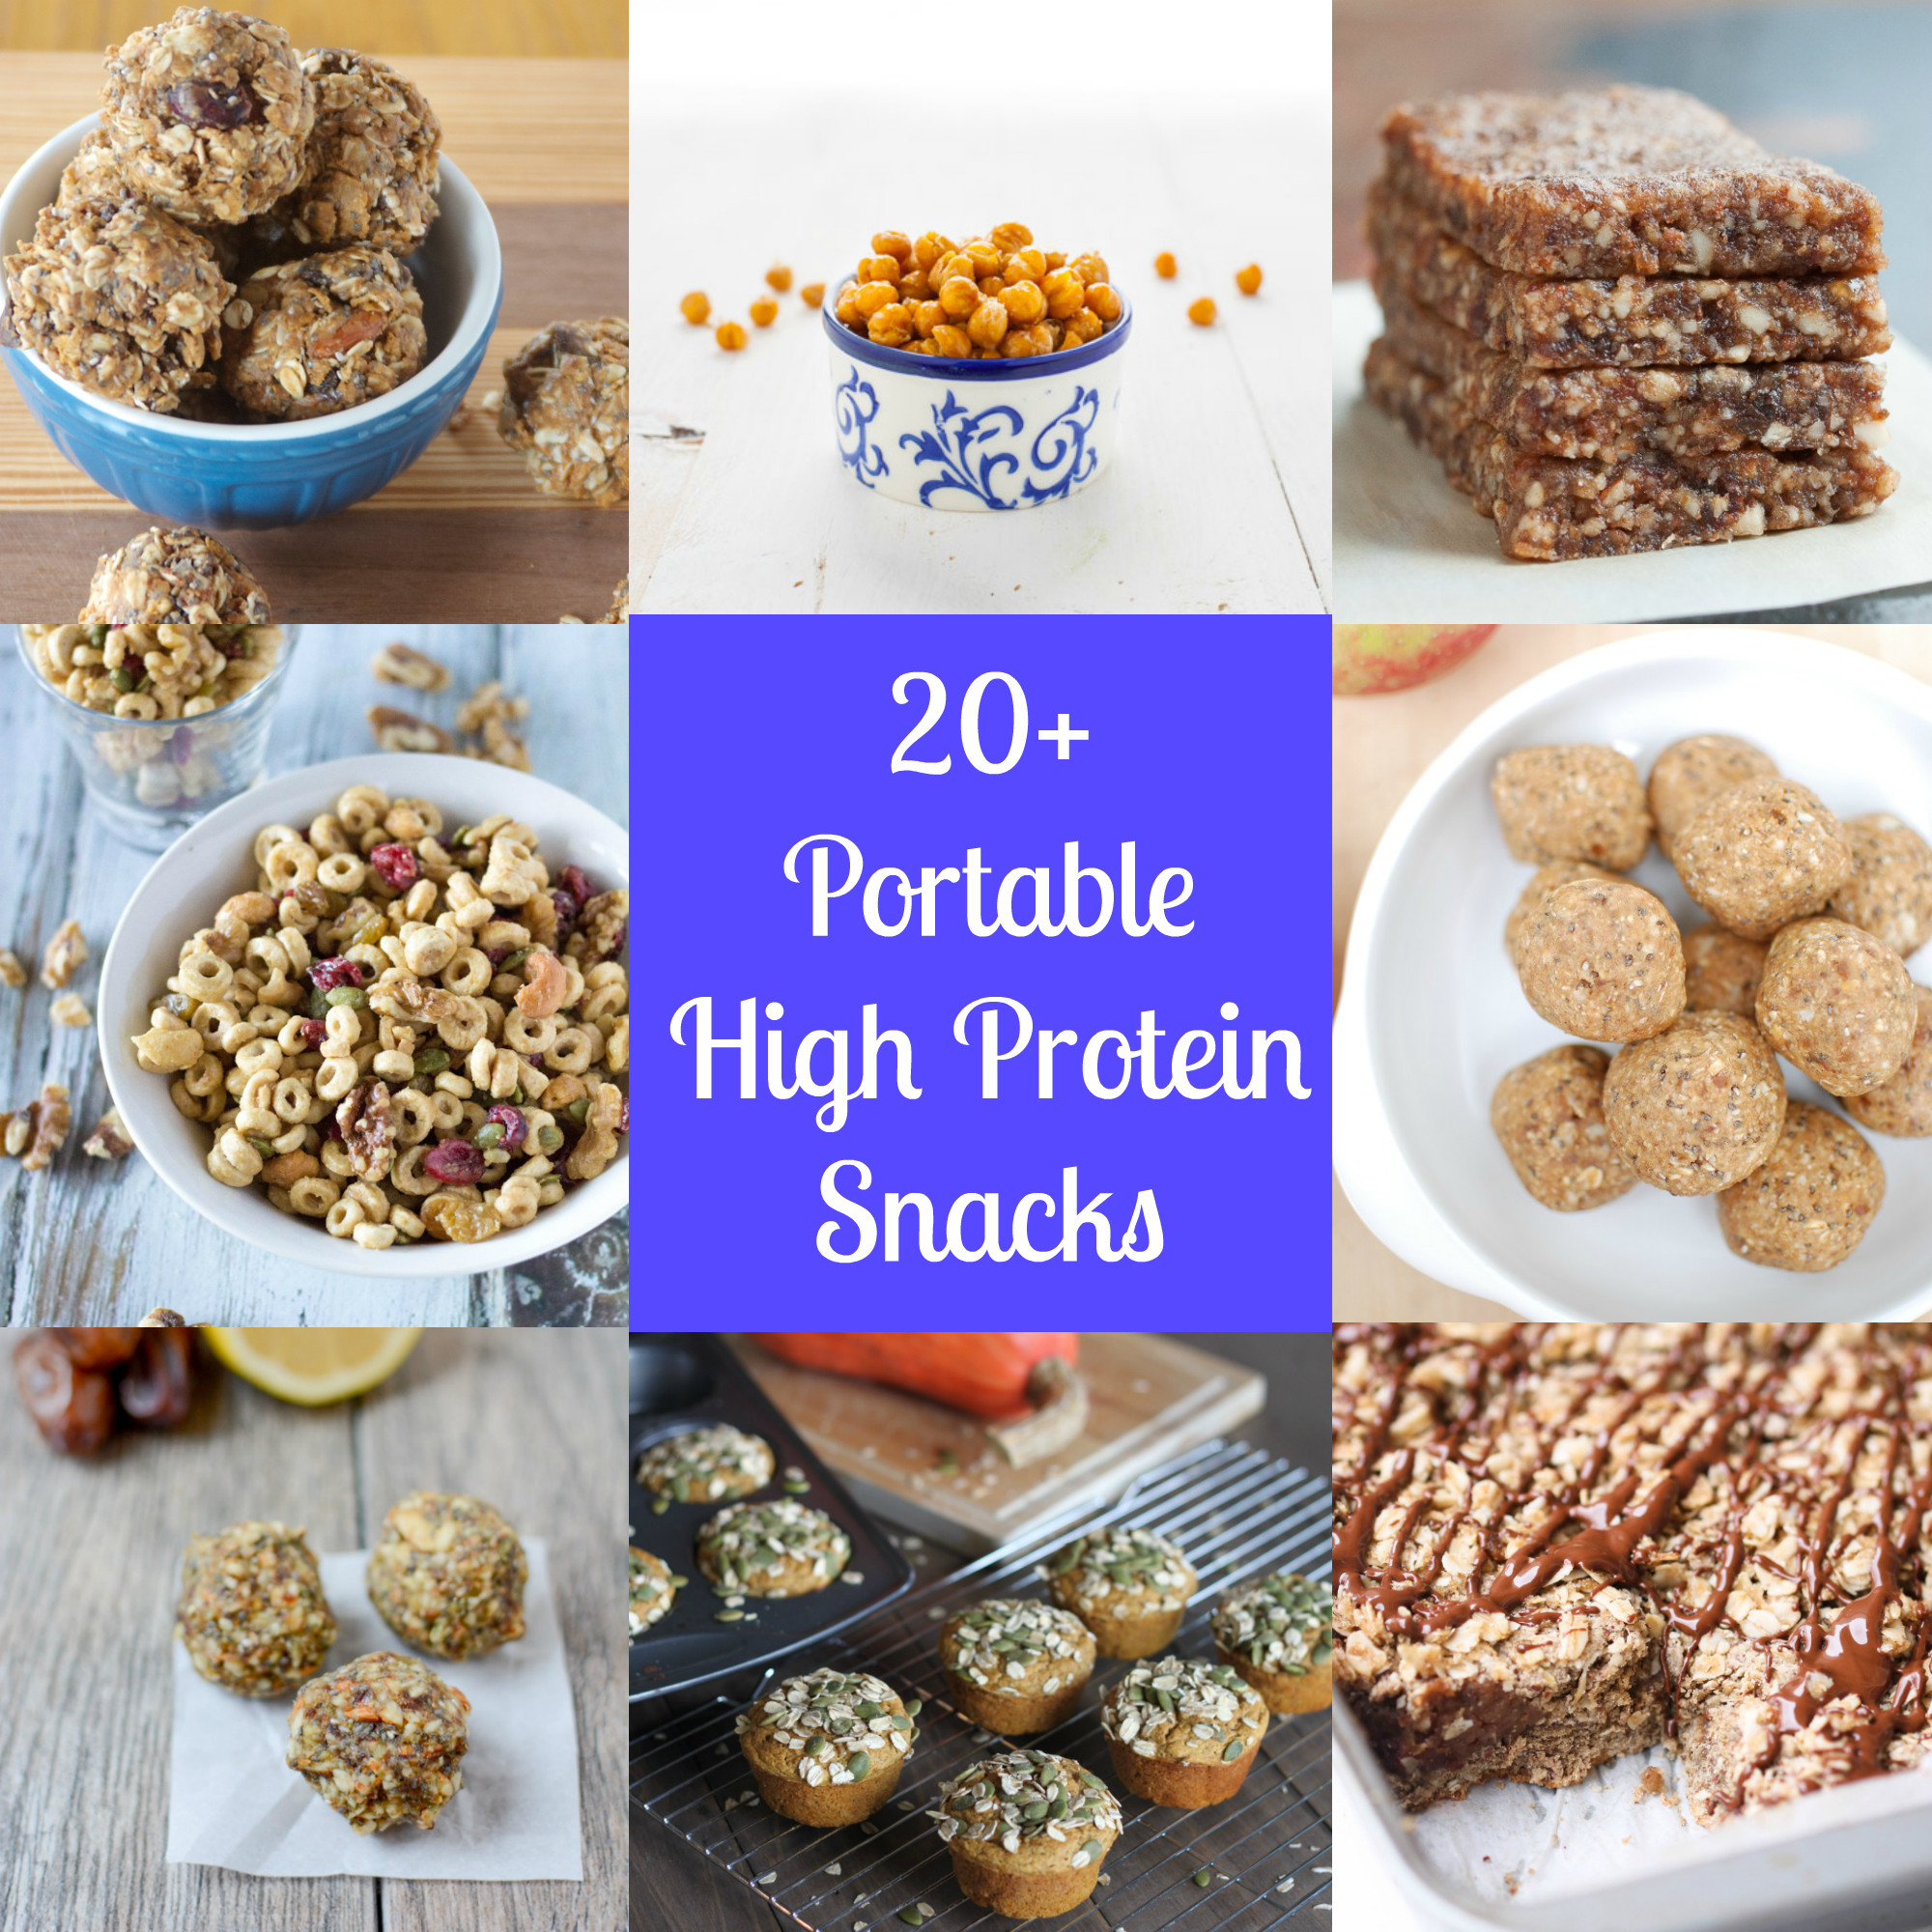 Healthy High Protein Snacks
 Portable High Protein Snacks